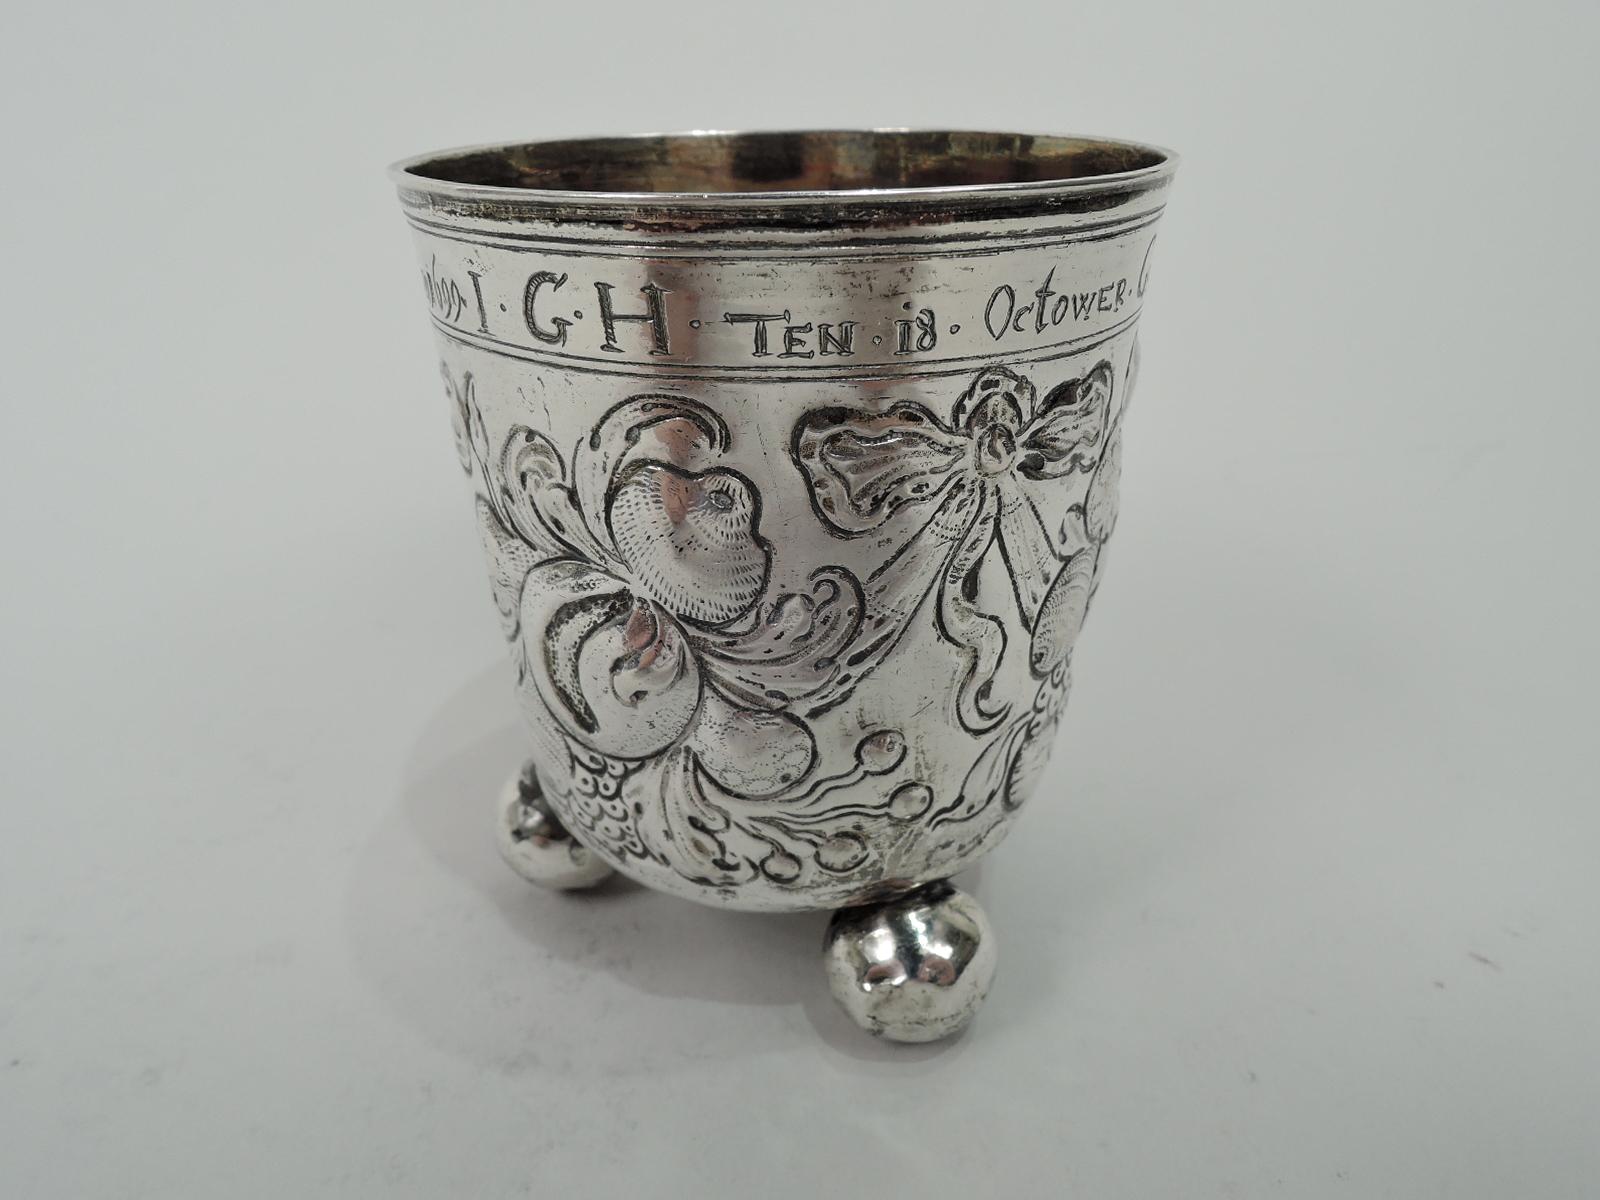 German Baroque Classical silver wine beaker, 17th century. Urn bowl with three splayed ball supports. Clusters of fruits and vegetables and pendant ribbon bows. At top engraved presentation on occasion of child born in 1699. Gilt-washed interior.